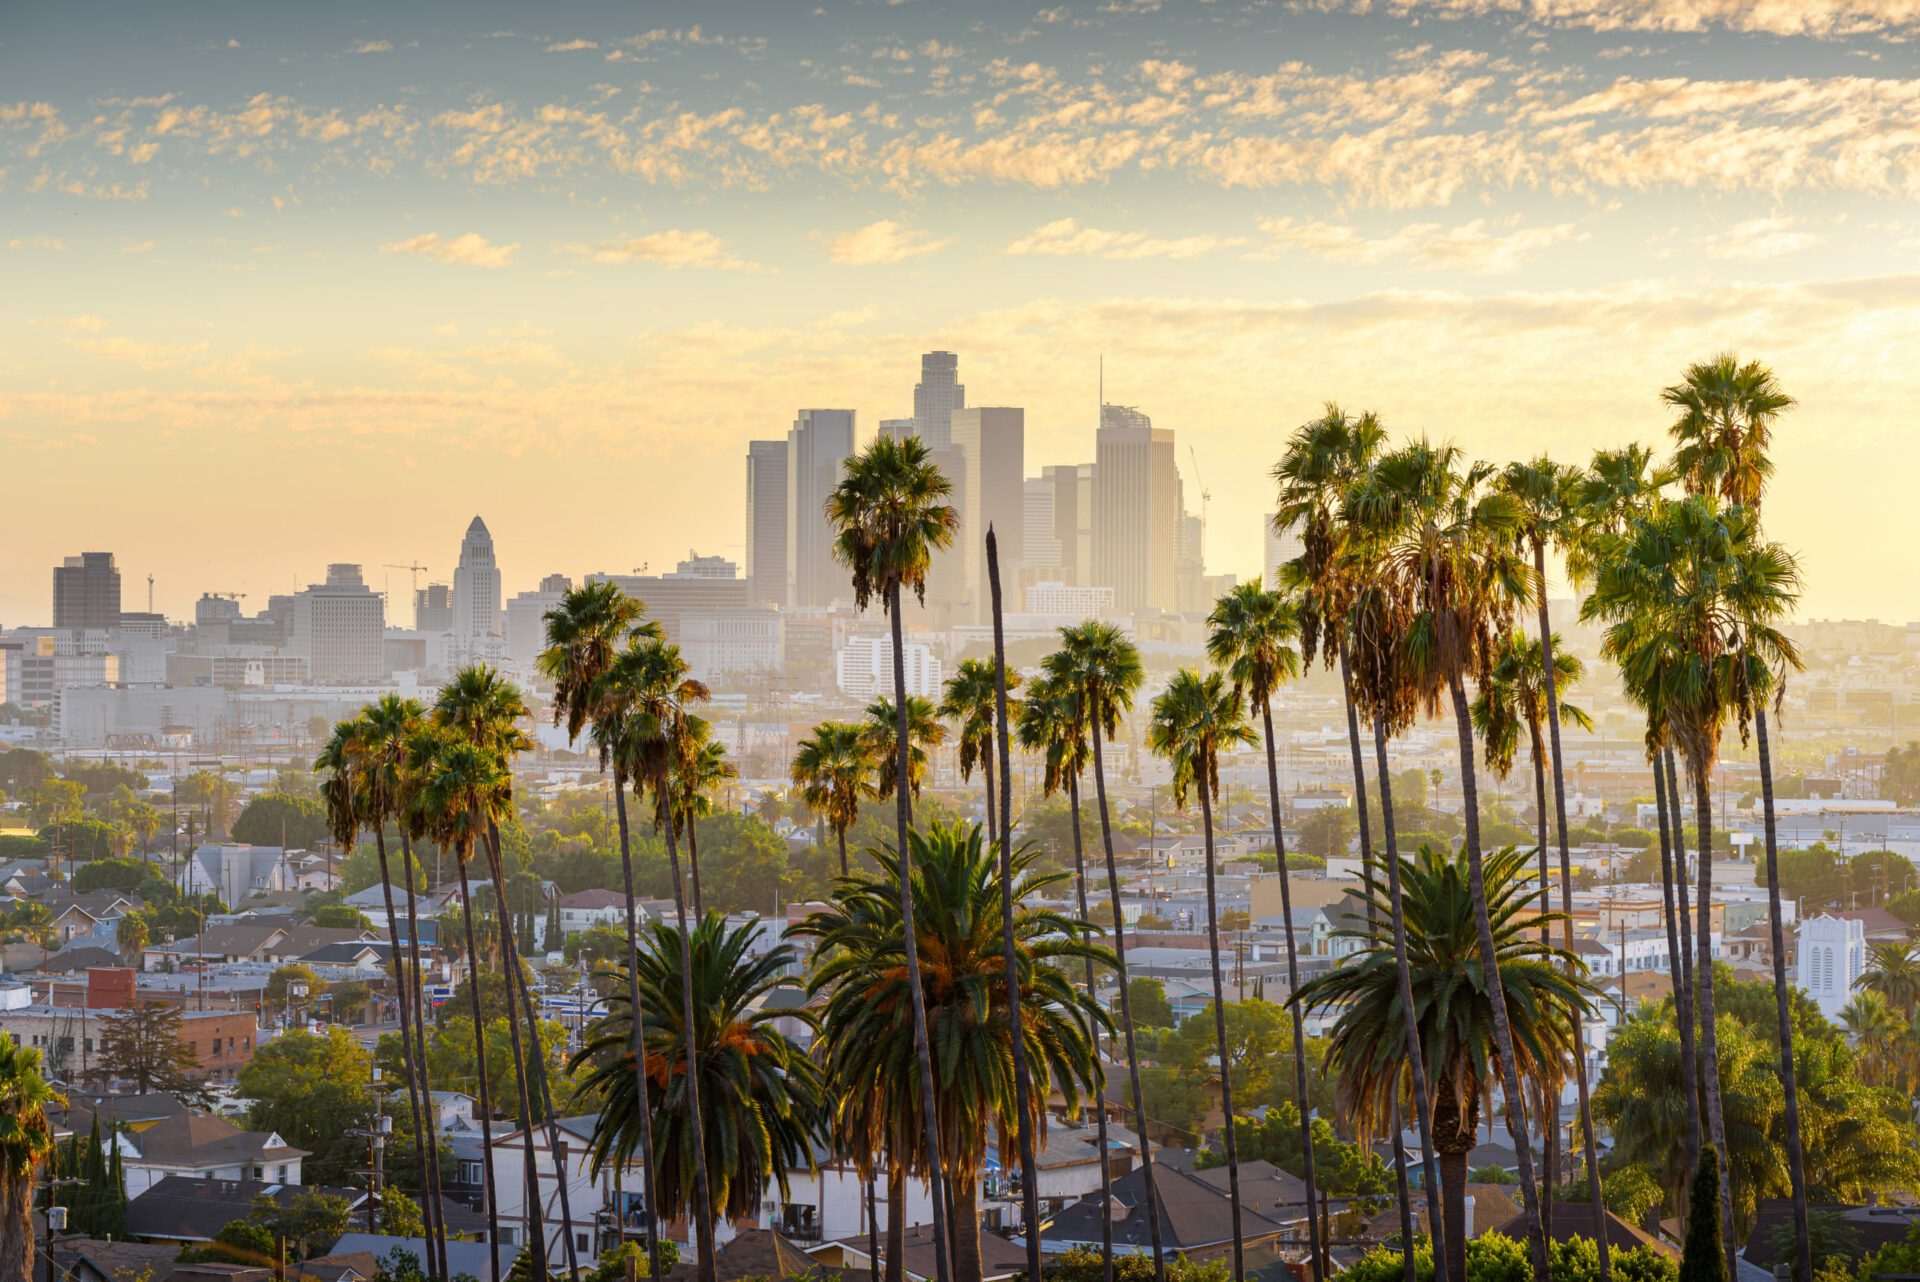 Built in LA: Welcome Tech Secures $30M to Build the Future of Immigration